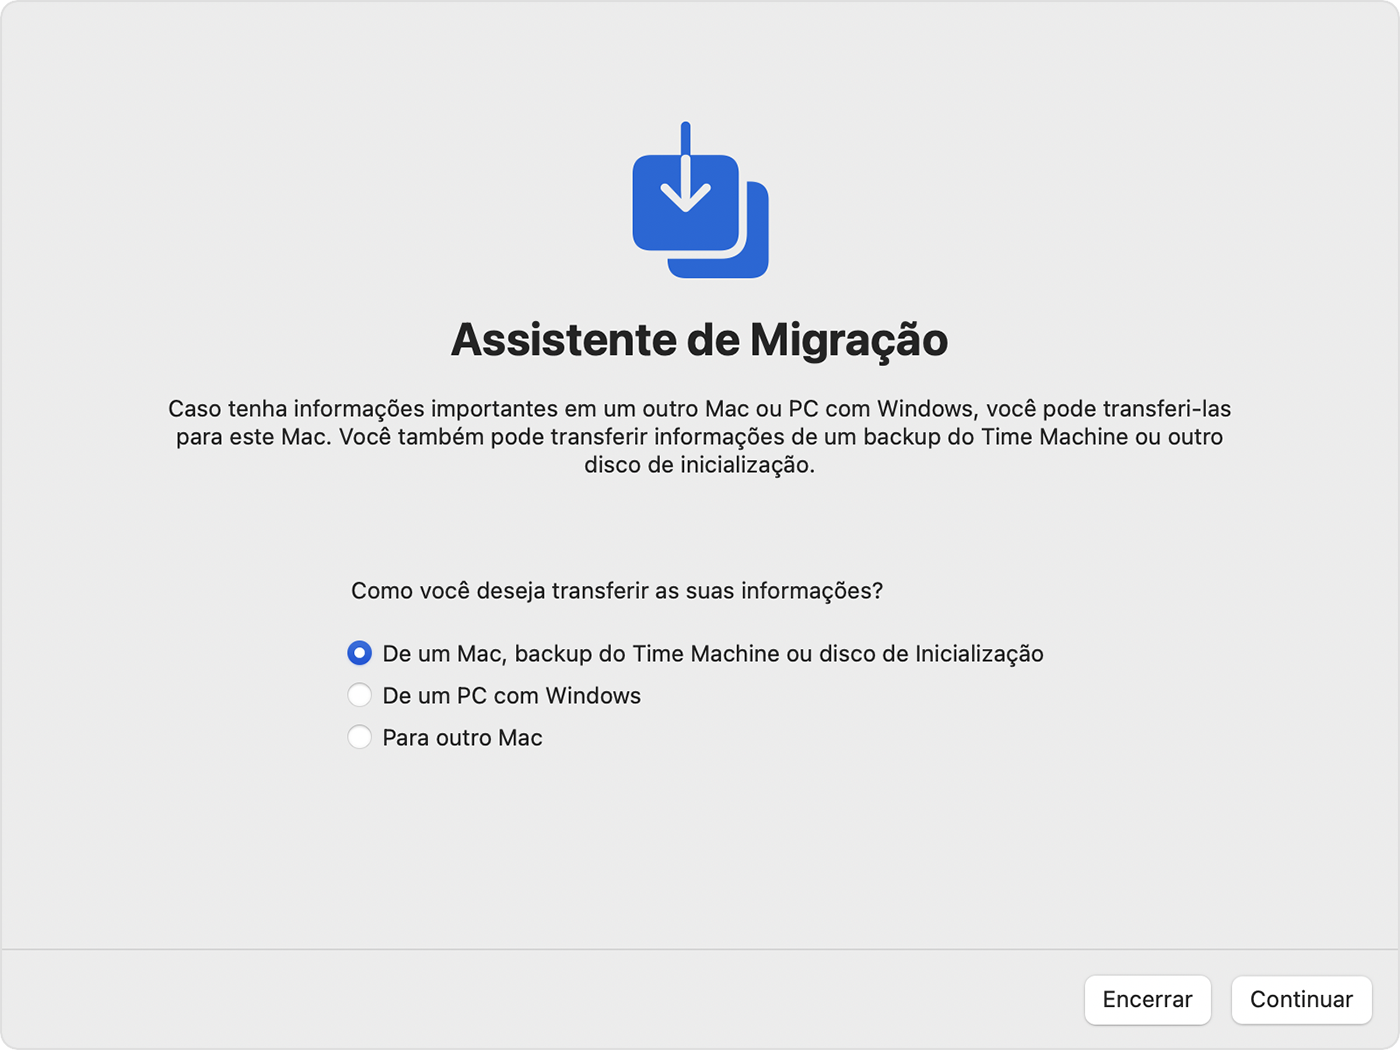 macos-monterey-migration-assistant-transfer-from-mac